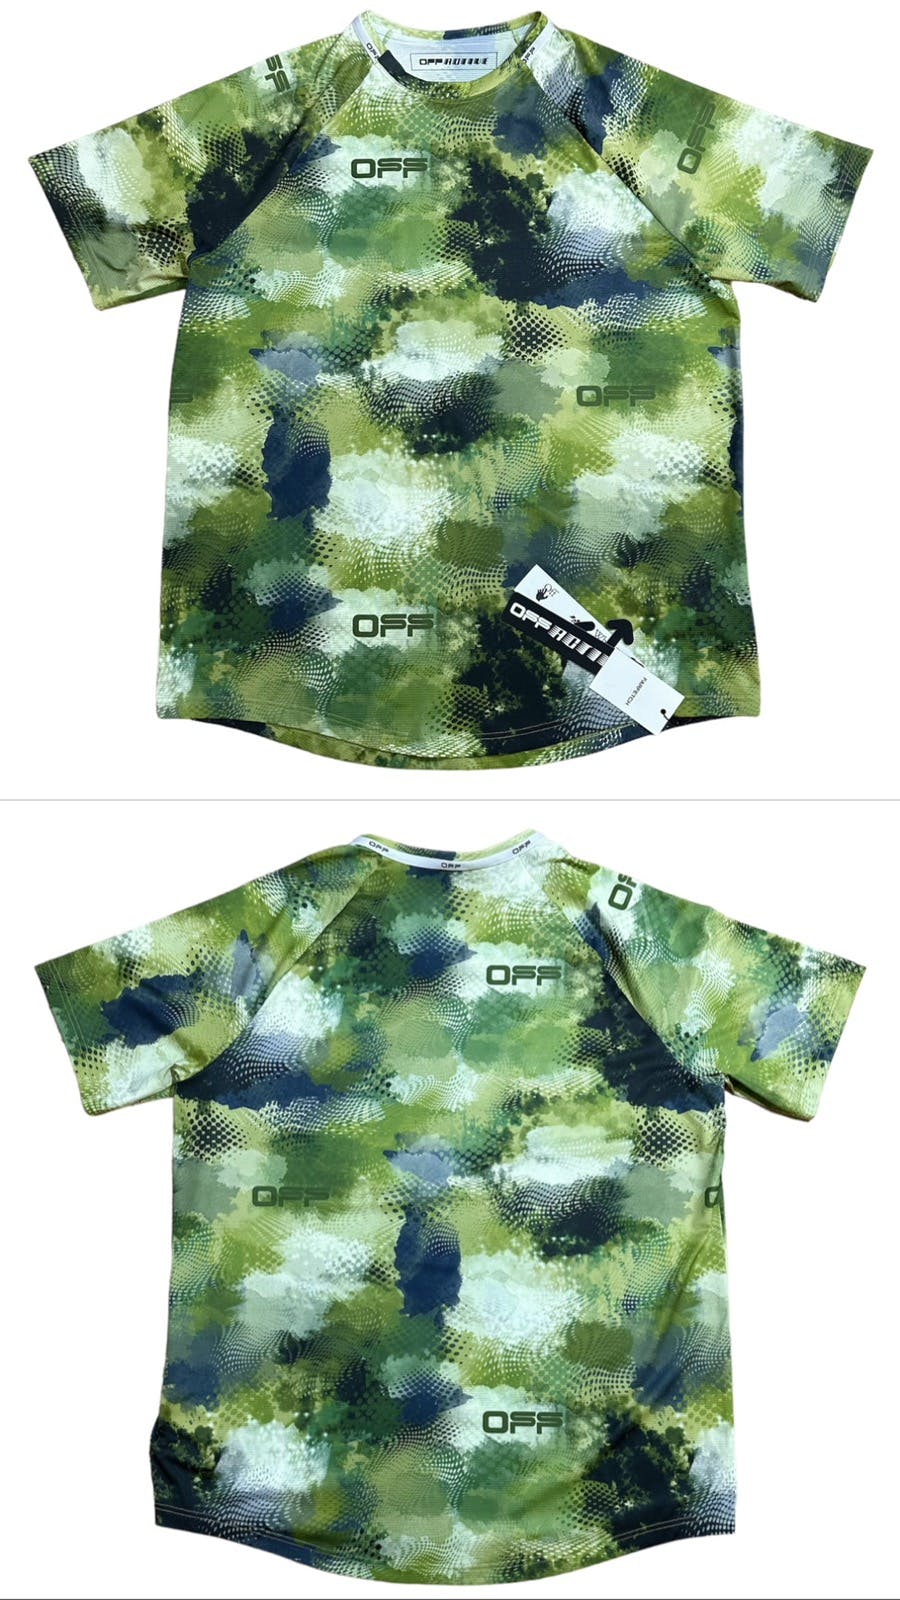 Off White Active Camo Print Jersey - 1